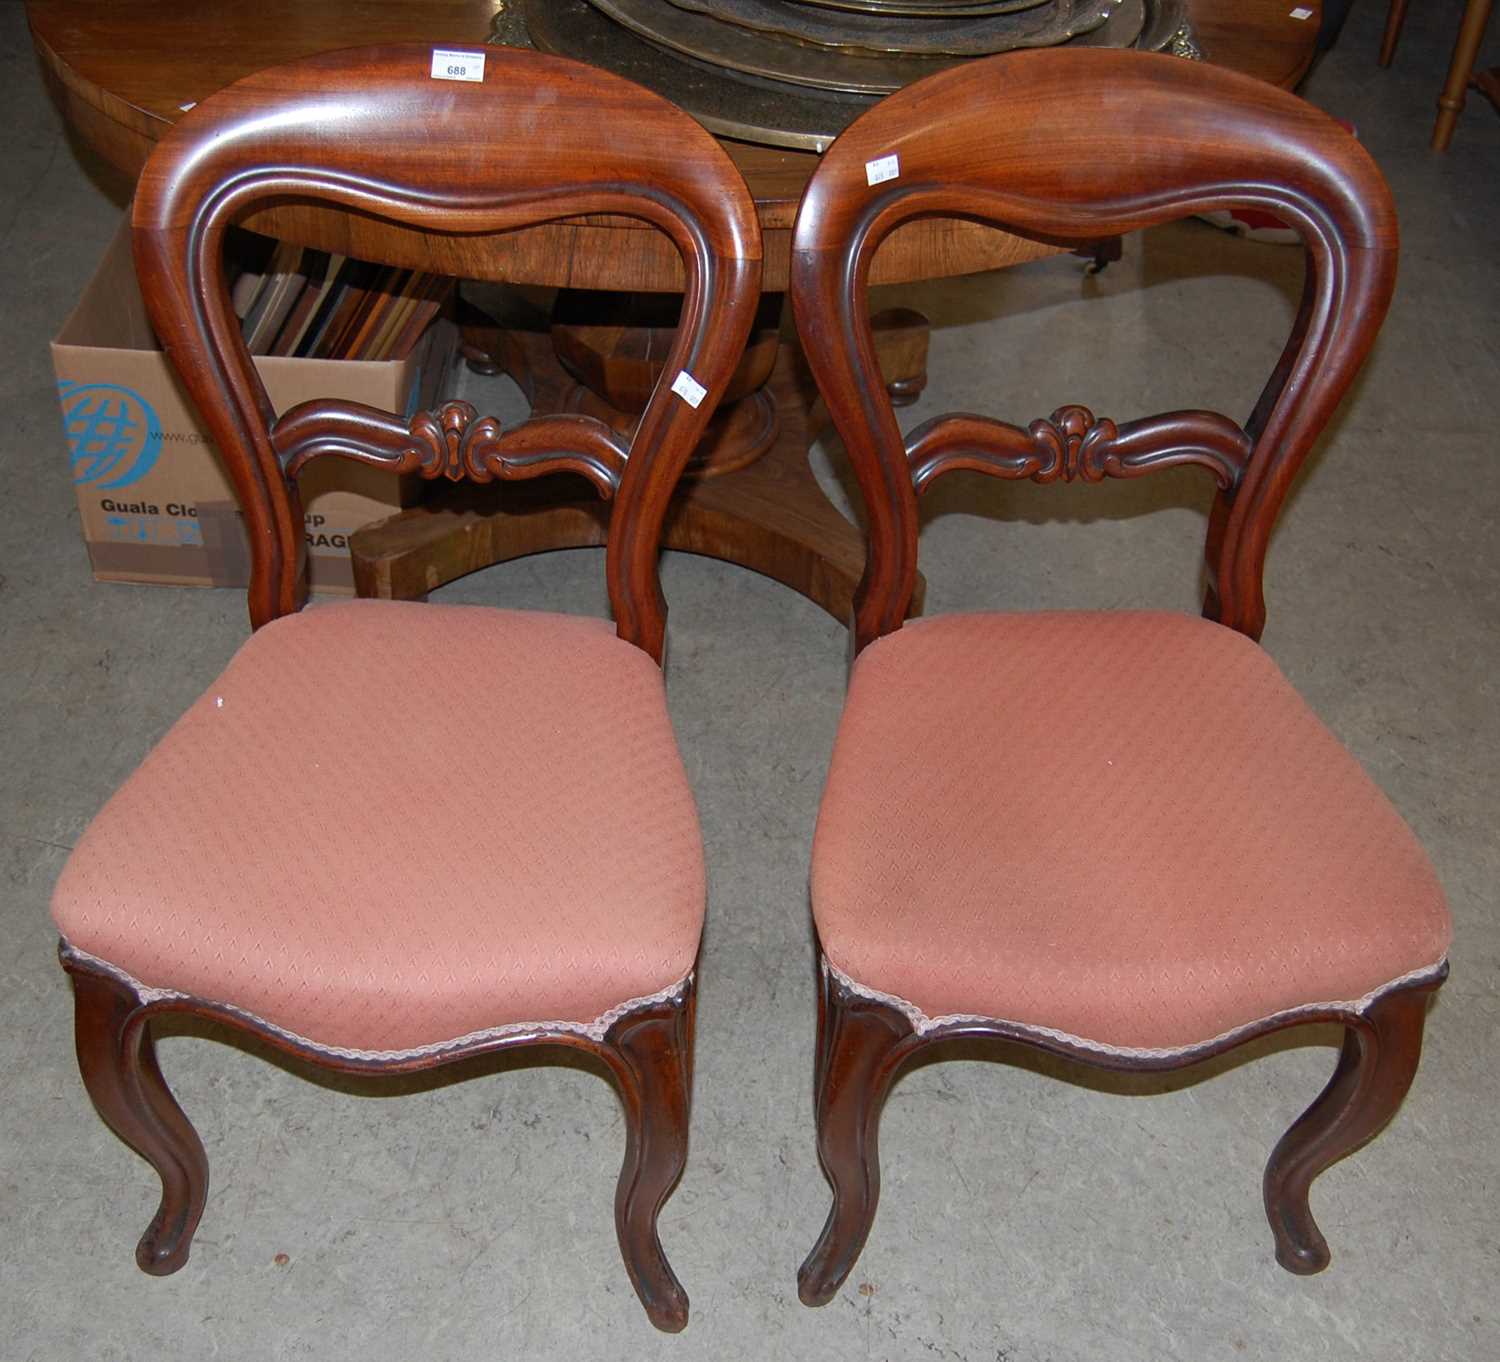 Two pairs of Victorian mahogany balloon back chairs, all with corresponding upholstered seats